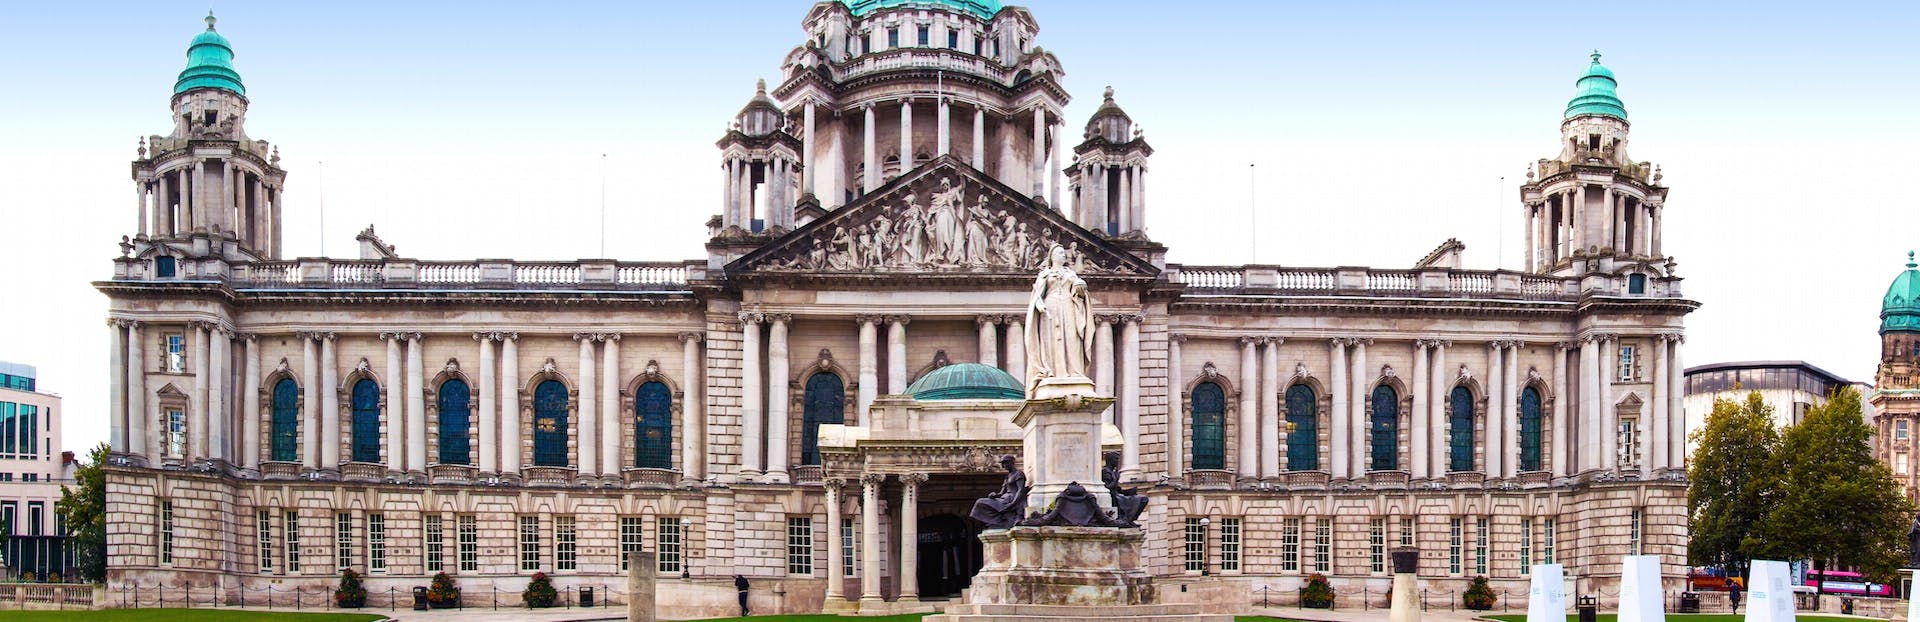 Explore the best of Belfast on a self-guided audio tour